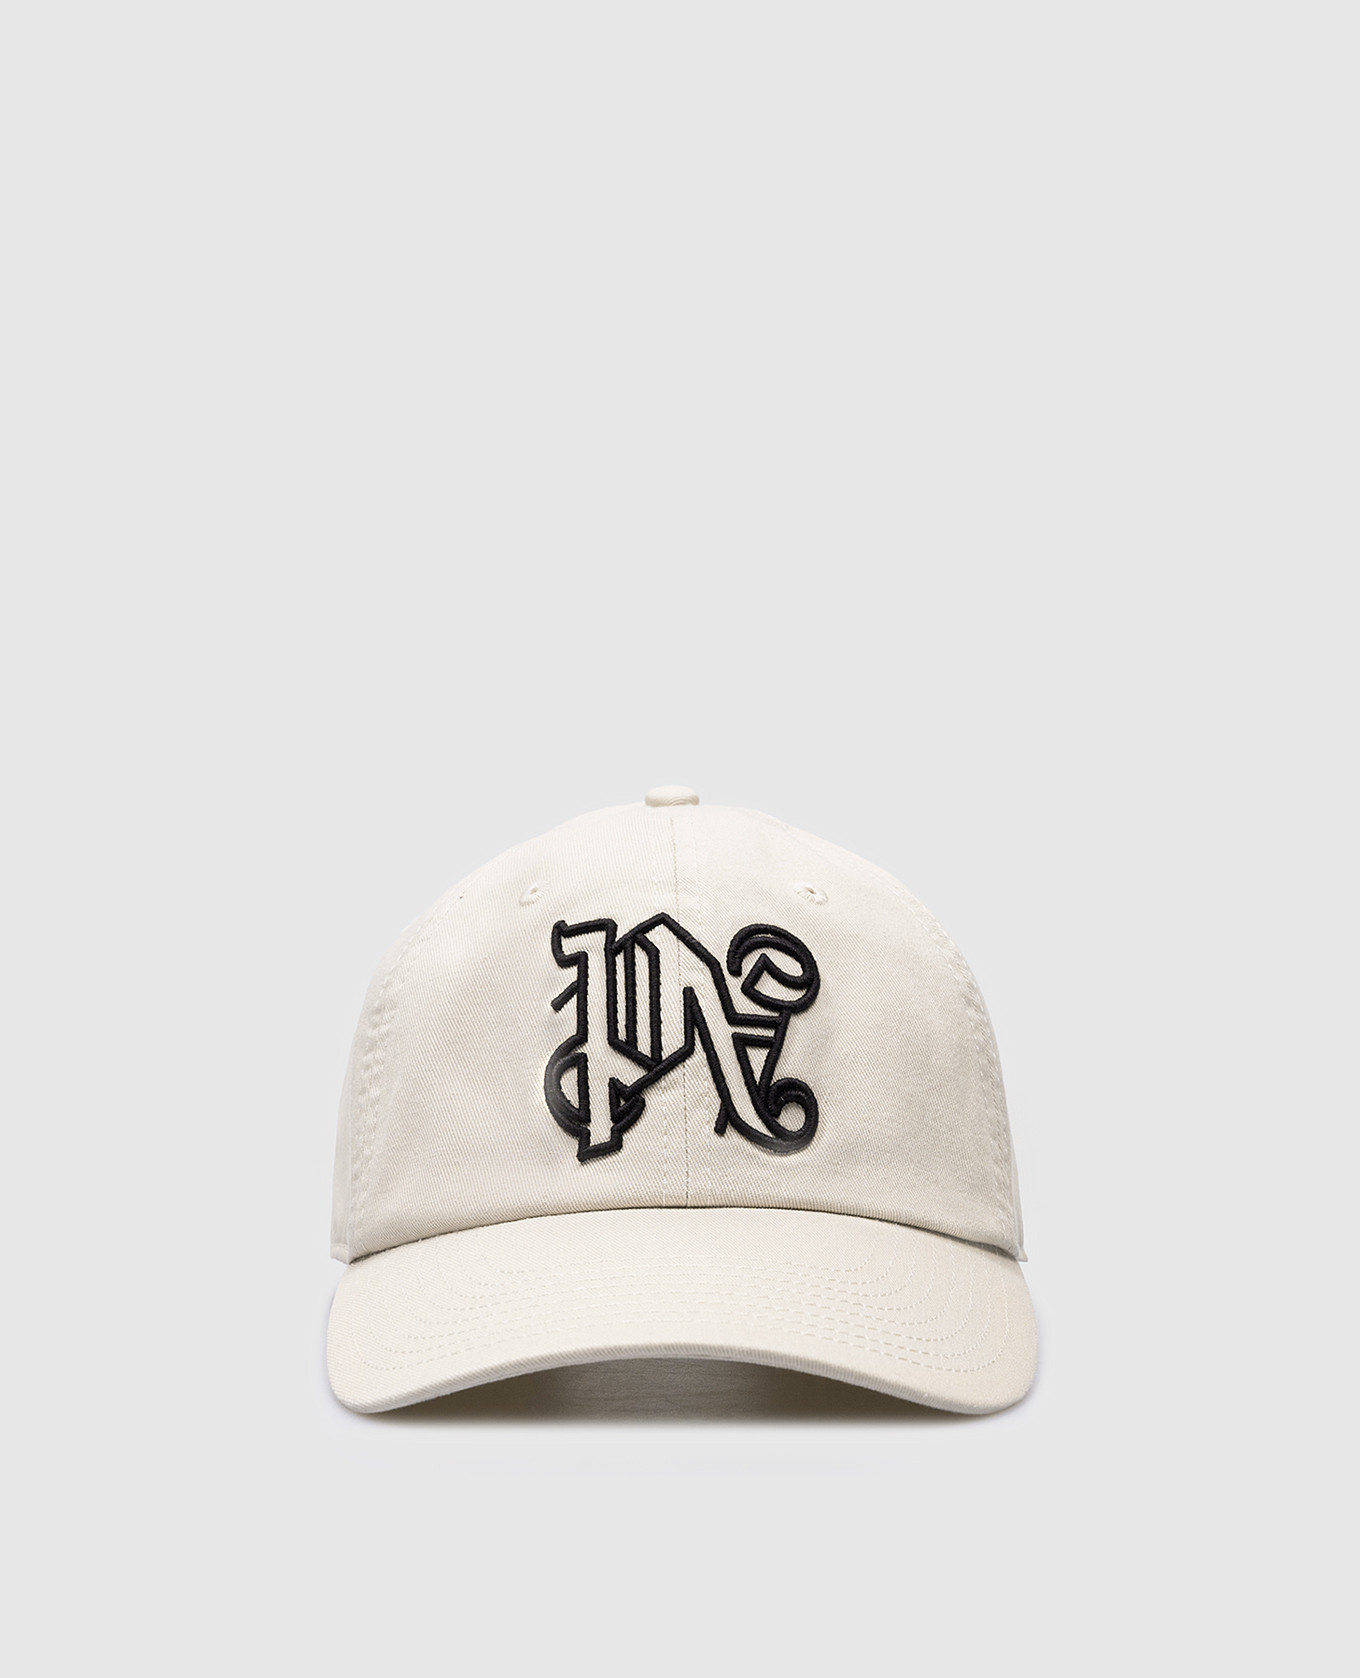 Beige cap with contrasting logo